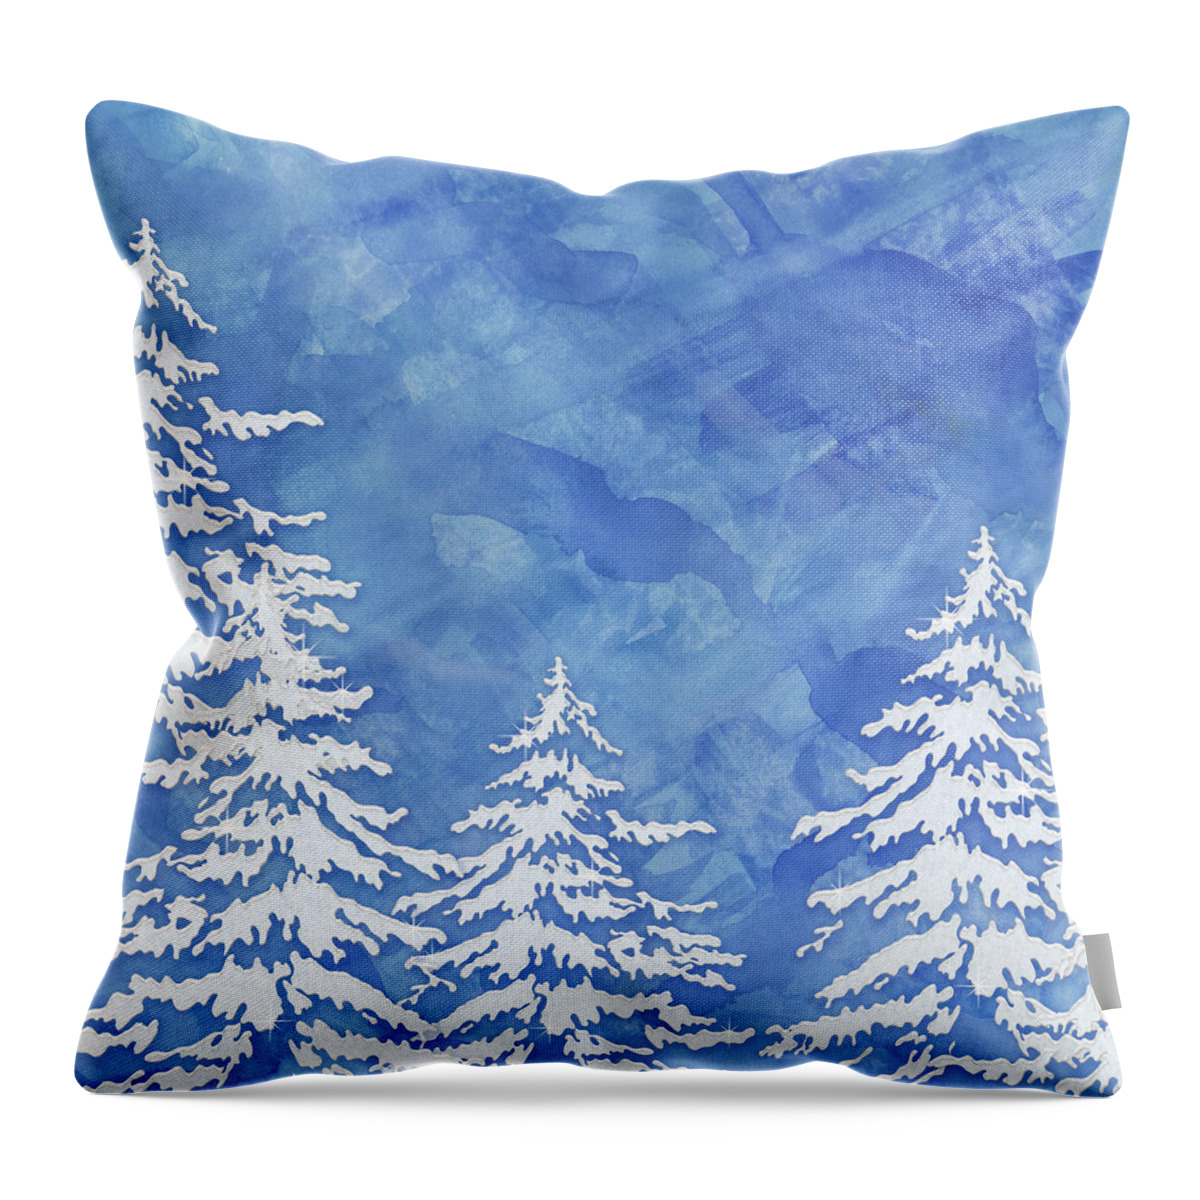 Watercolor Throw Pillow featuring the painting Modern Watercolor Winter Abstract - Snowy Trees by Audrey Jeanne Roberts